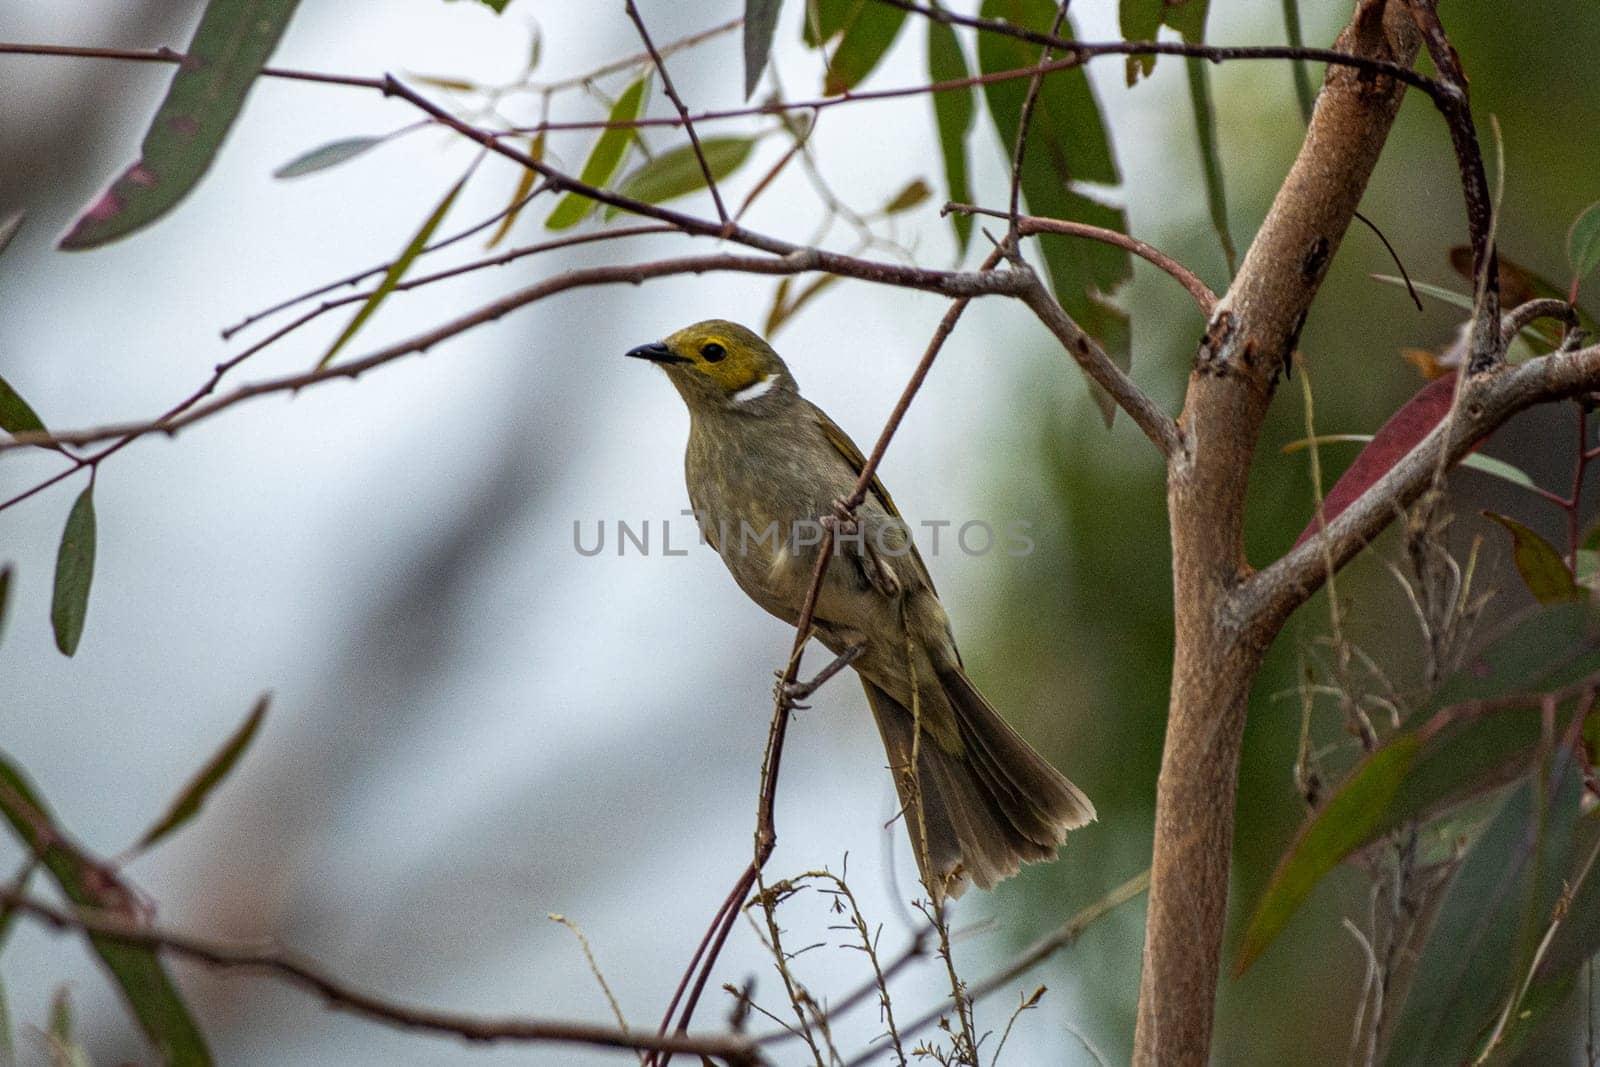 The white-plumed honeyeater is a delightful bird native to Australia, with striking white plumage and melodic calls it flits among flowers, sipping nectar and spreading joy with its graceful presence.